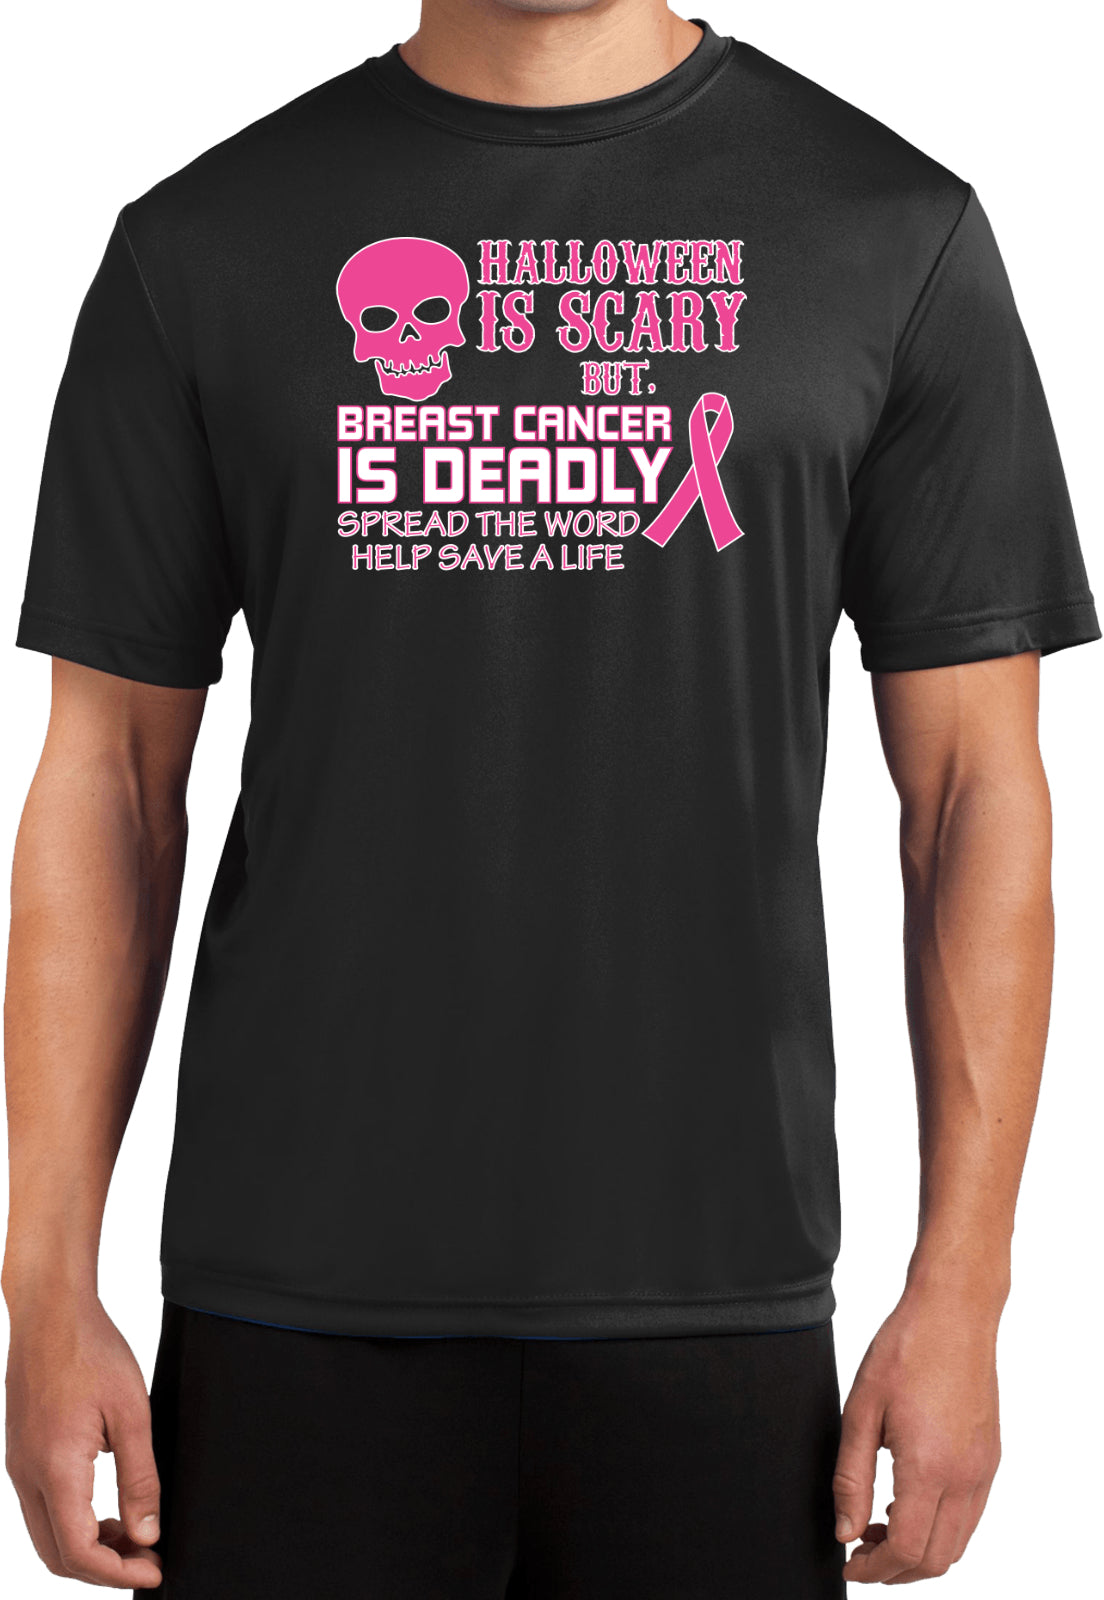 Breast Cancer T-shirt Halloween Scary Moisture Wicking Tee